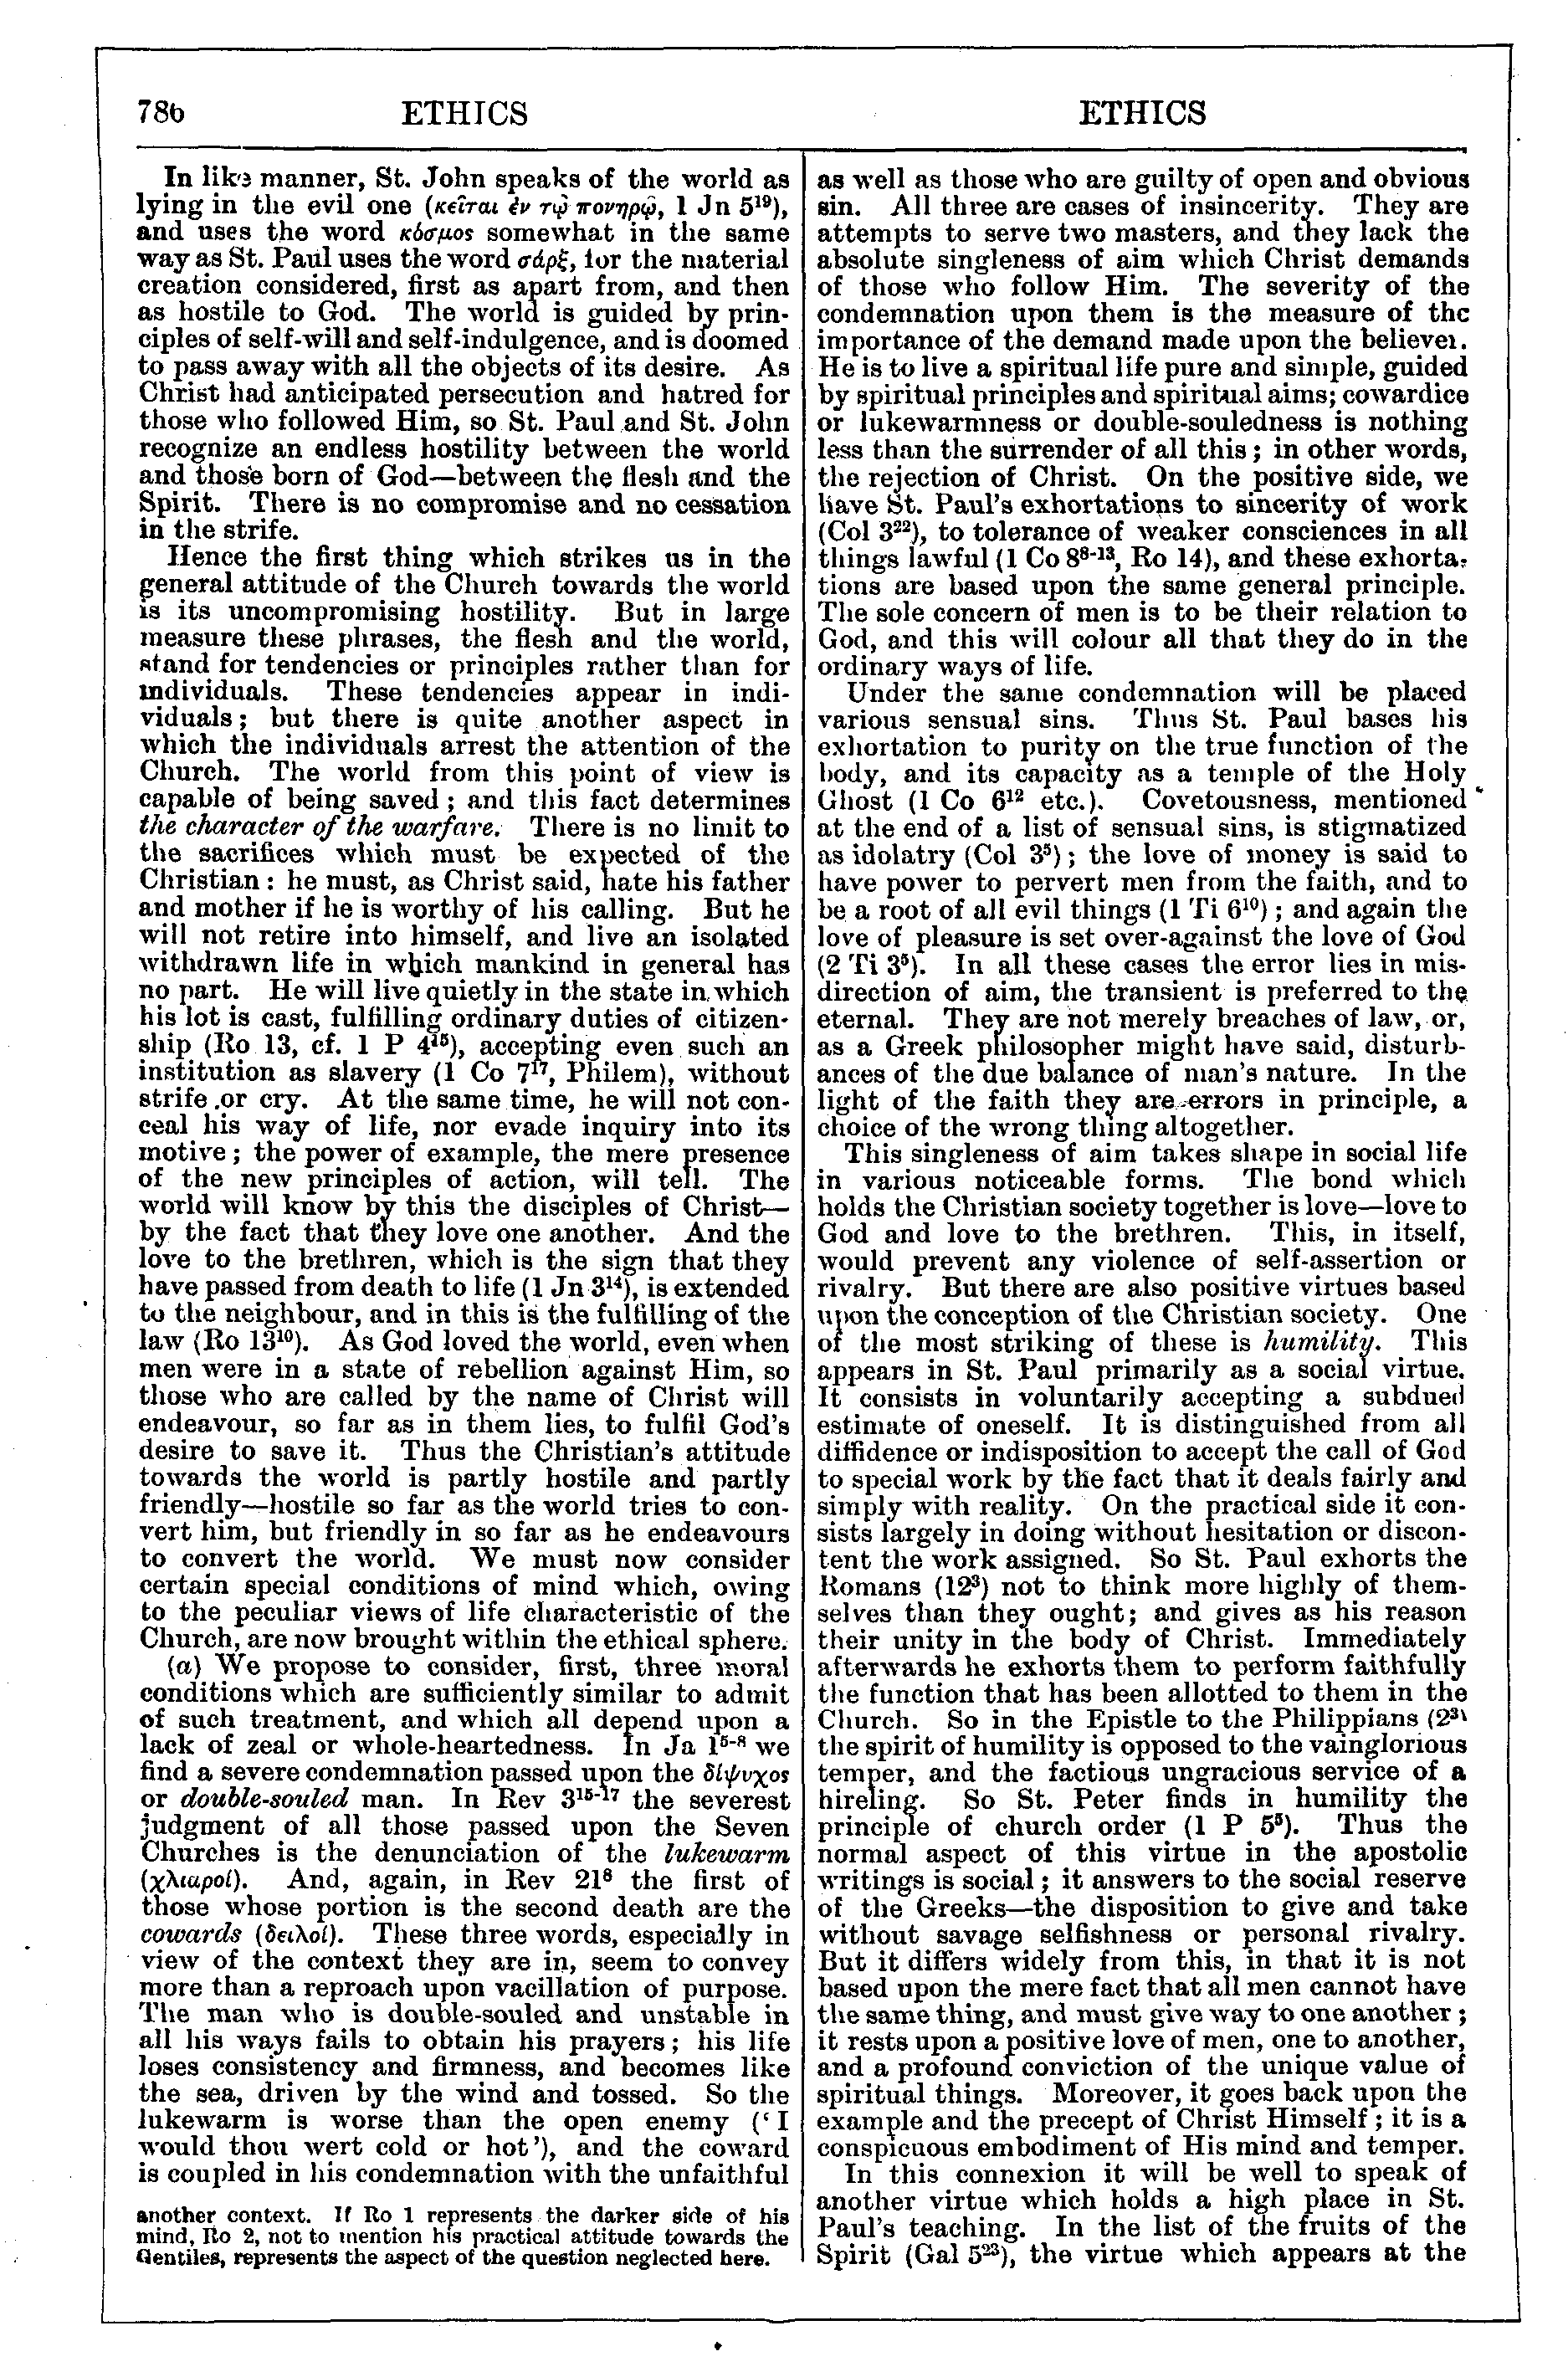 Image of page 786